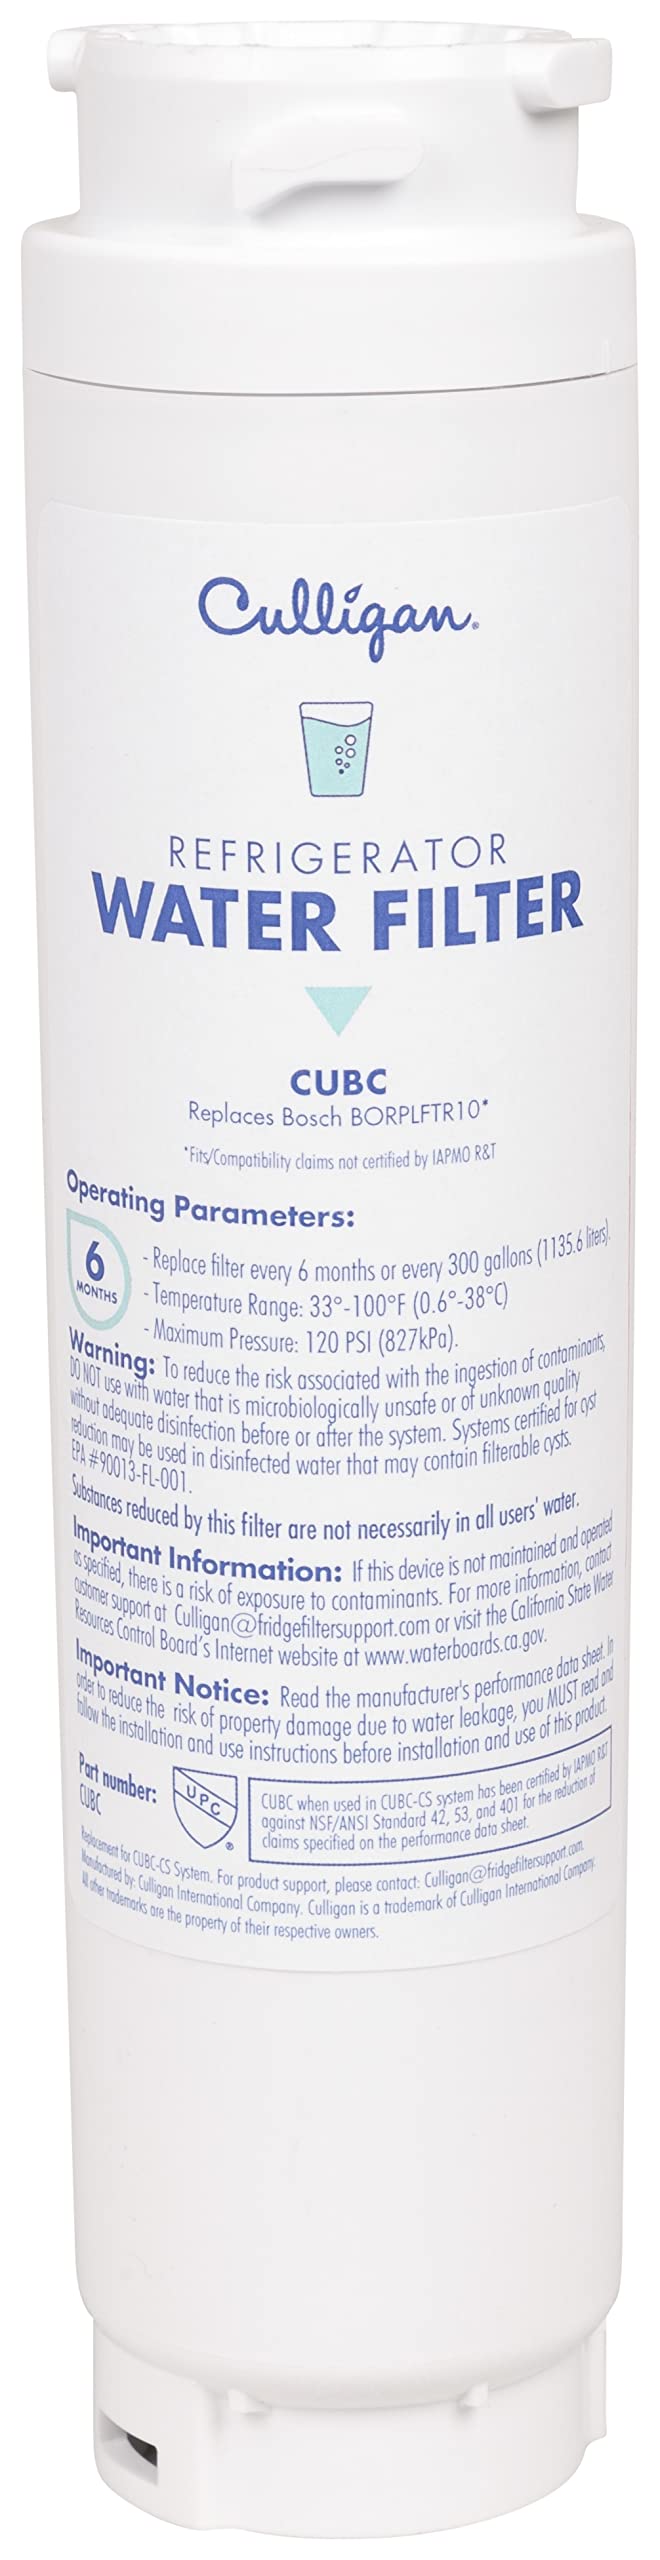 Culligan CUBC Refrigerator Water Filter | Replacement for Bosch Water Filter (BORPLFTR10) | Replace Every 6 Months | Pack of 1